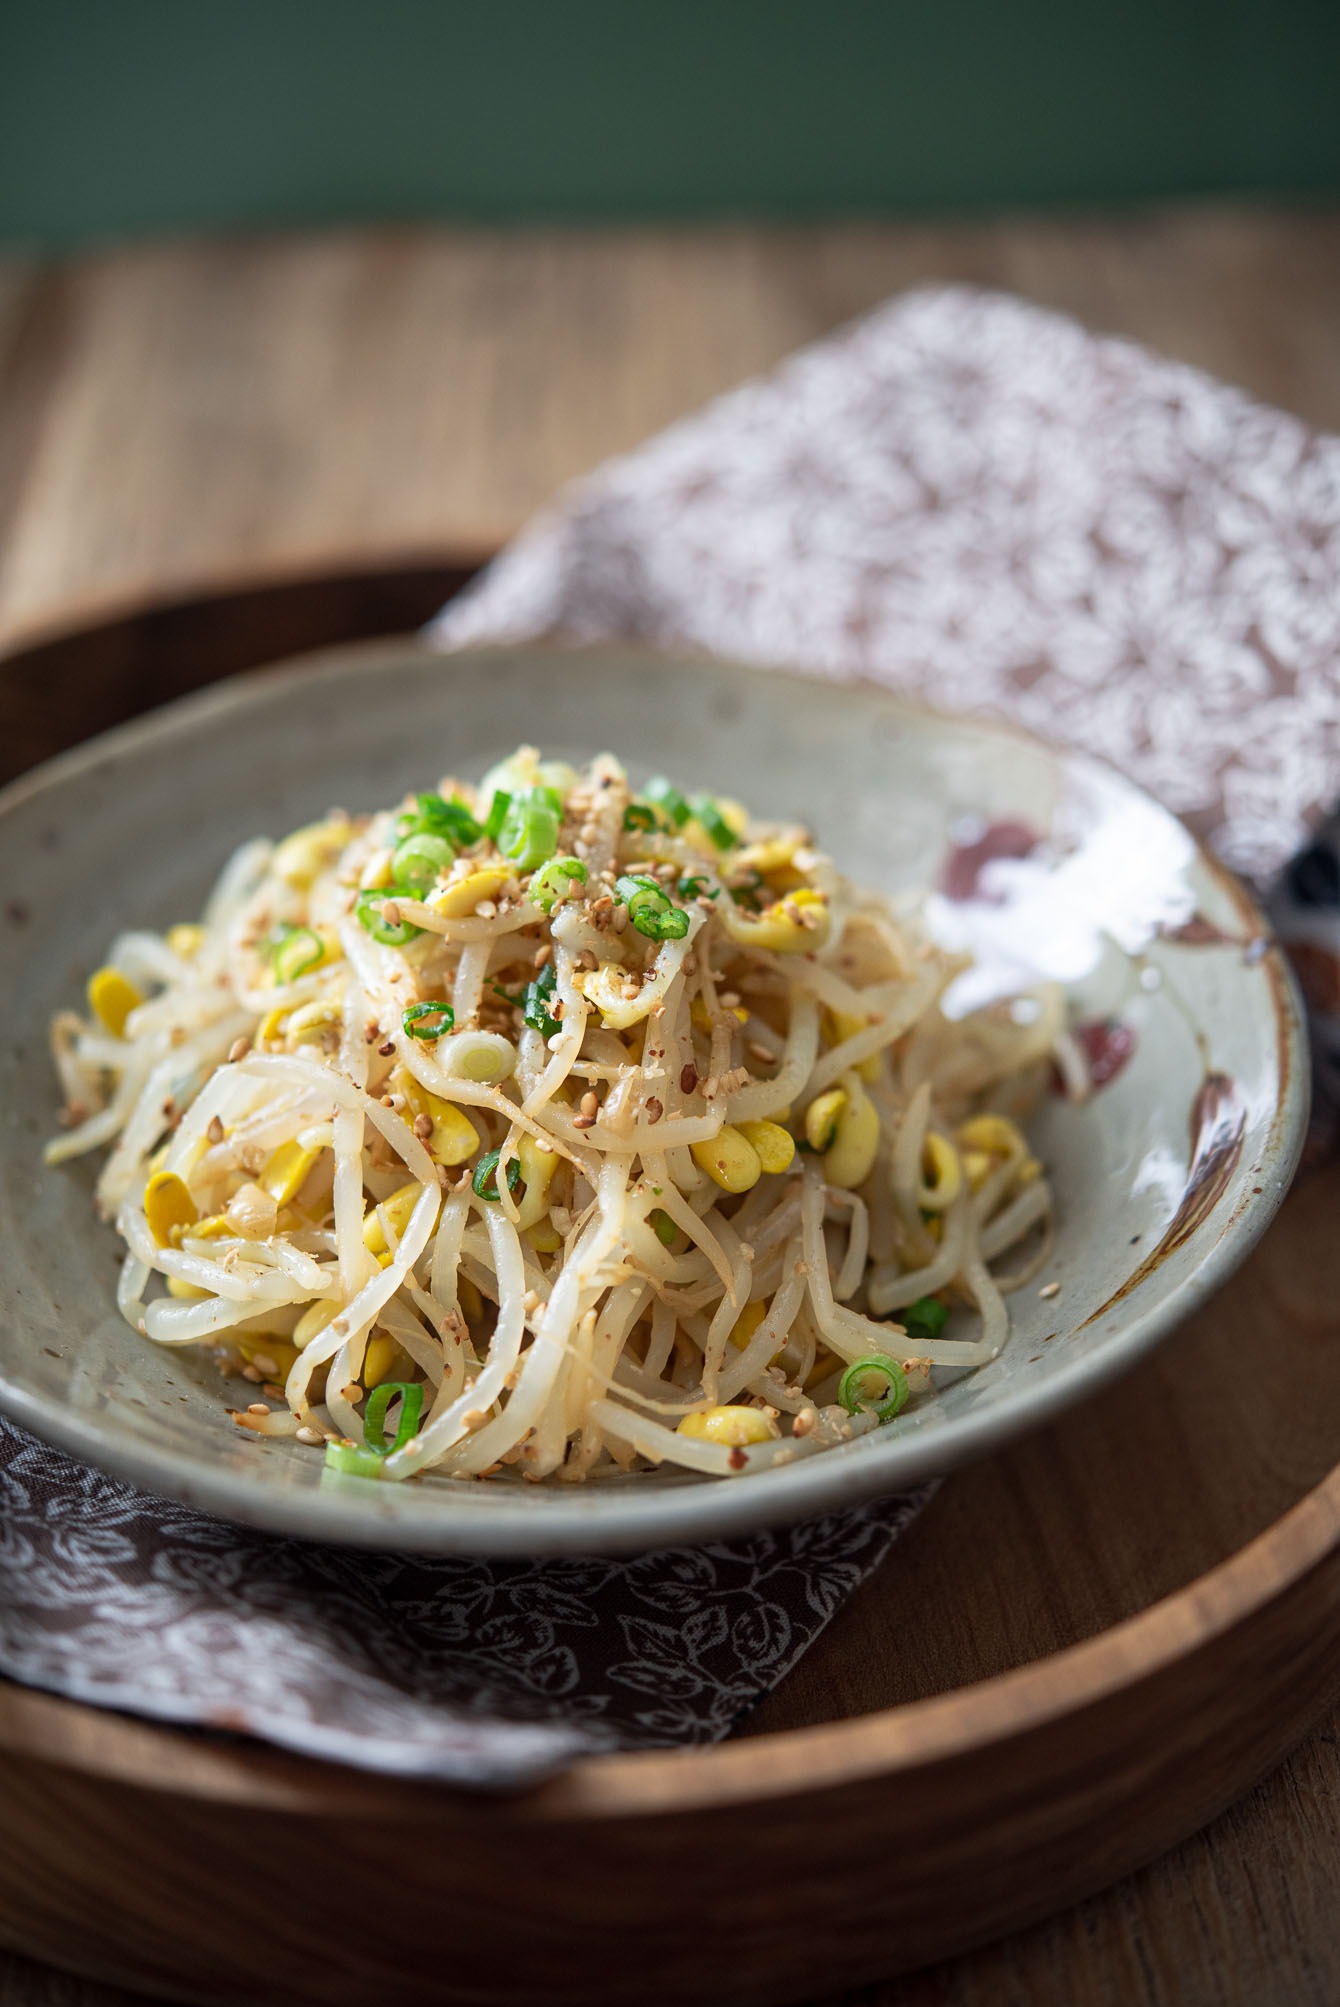 Bean sprout salad made with Korean soybean sprouts in 10 minutes.